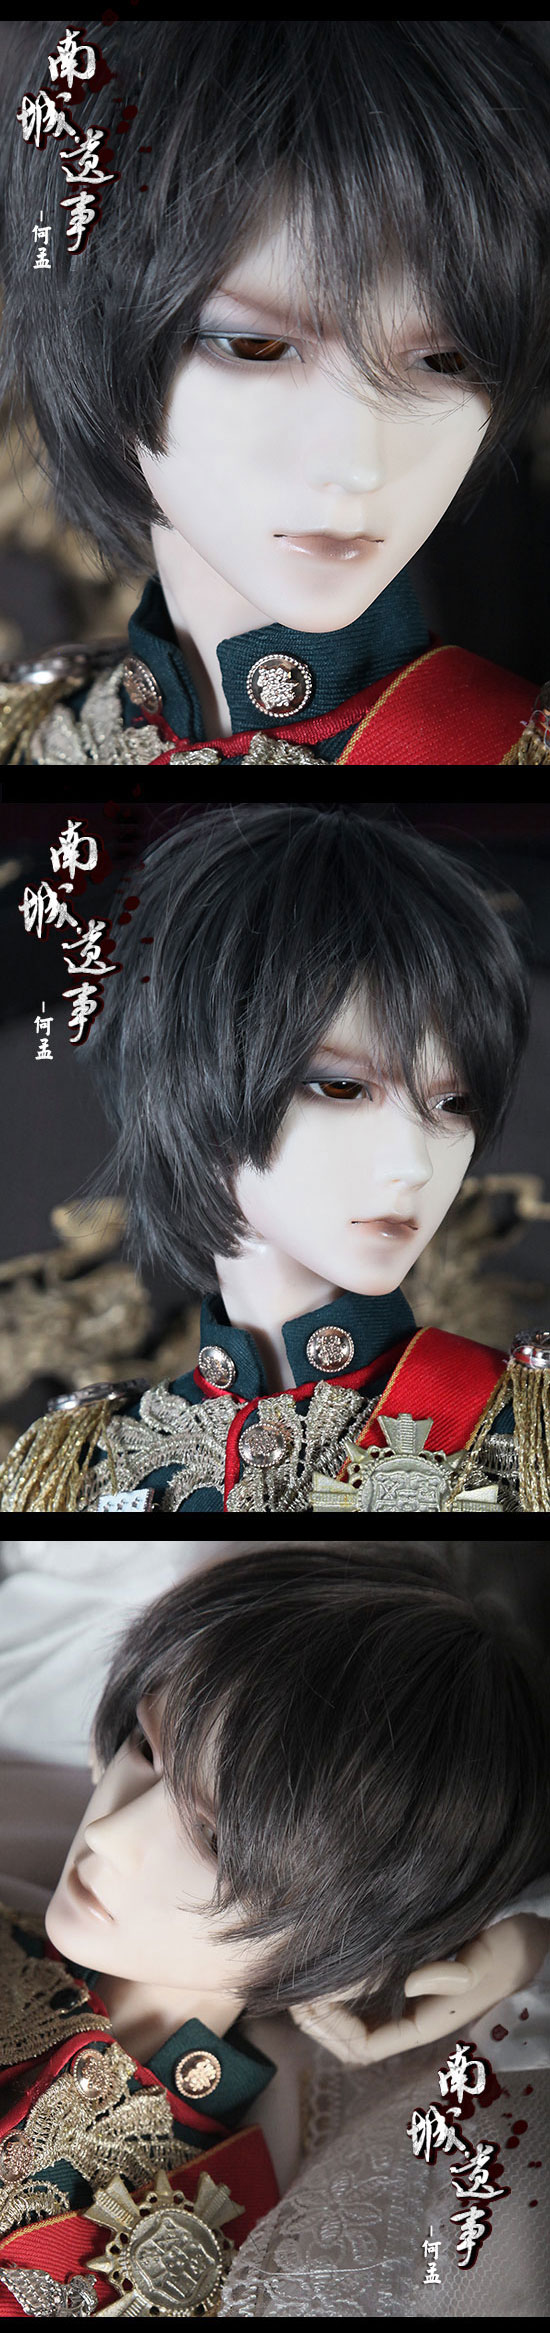 Wig 8in Menghe Rwigs60-32 of SD BJD (Ball-jointed Doll)